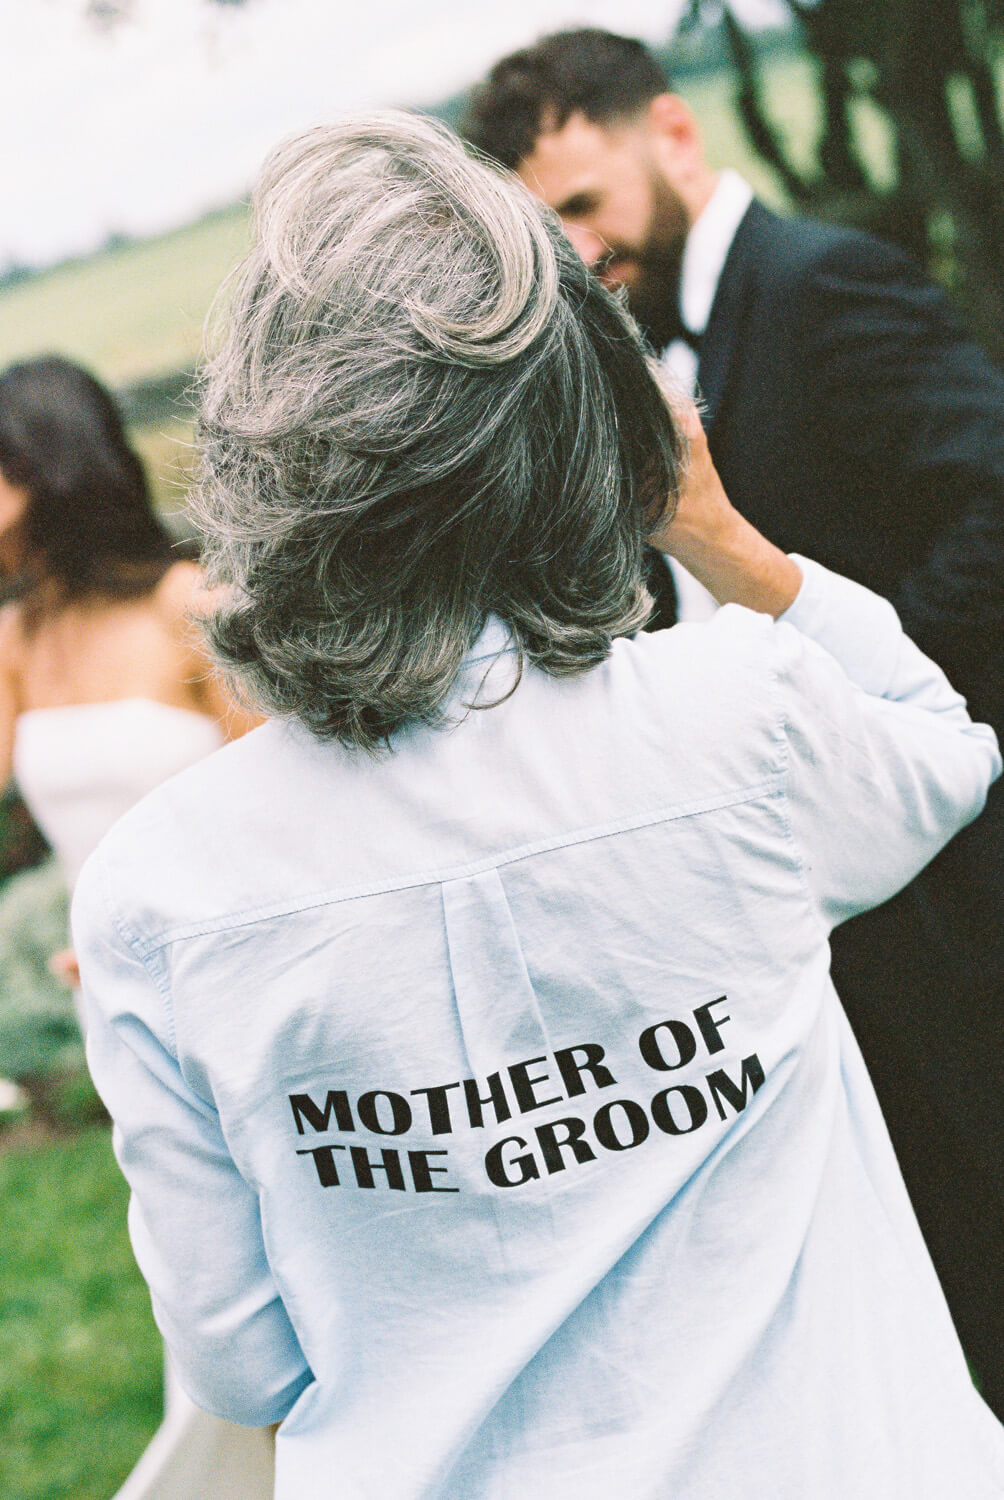 Mother of the Groom shirt